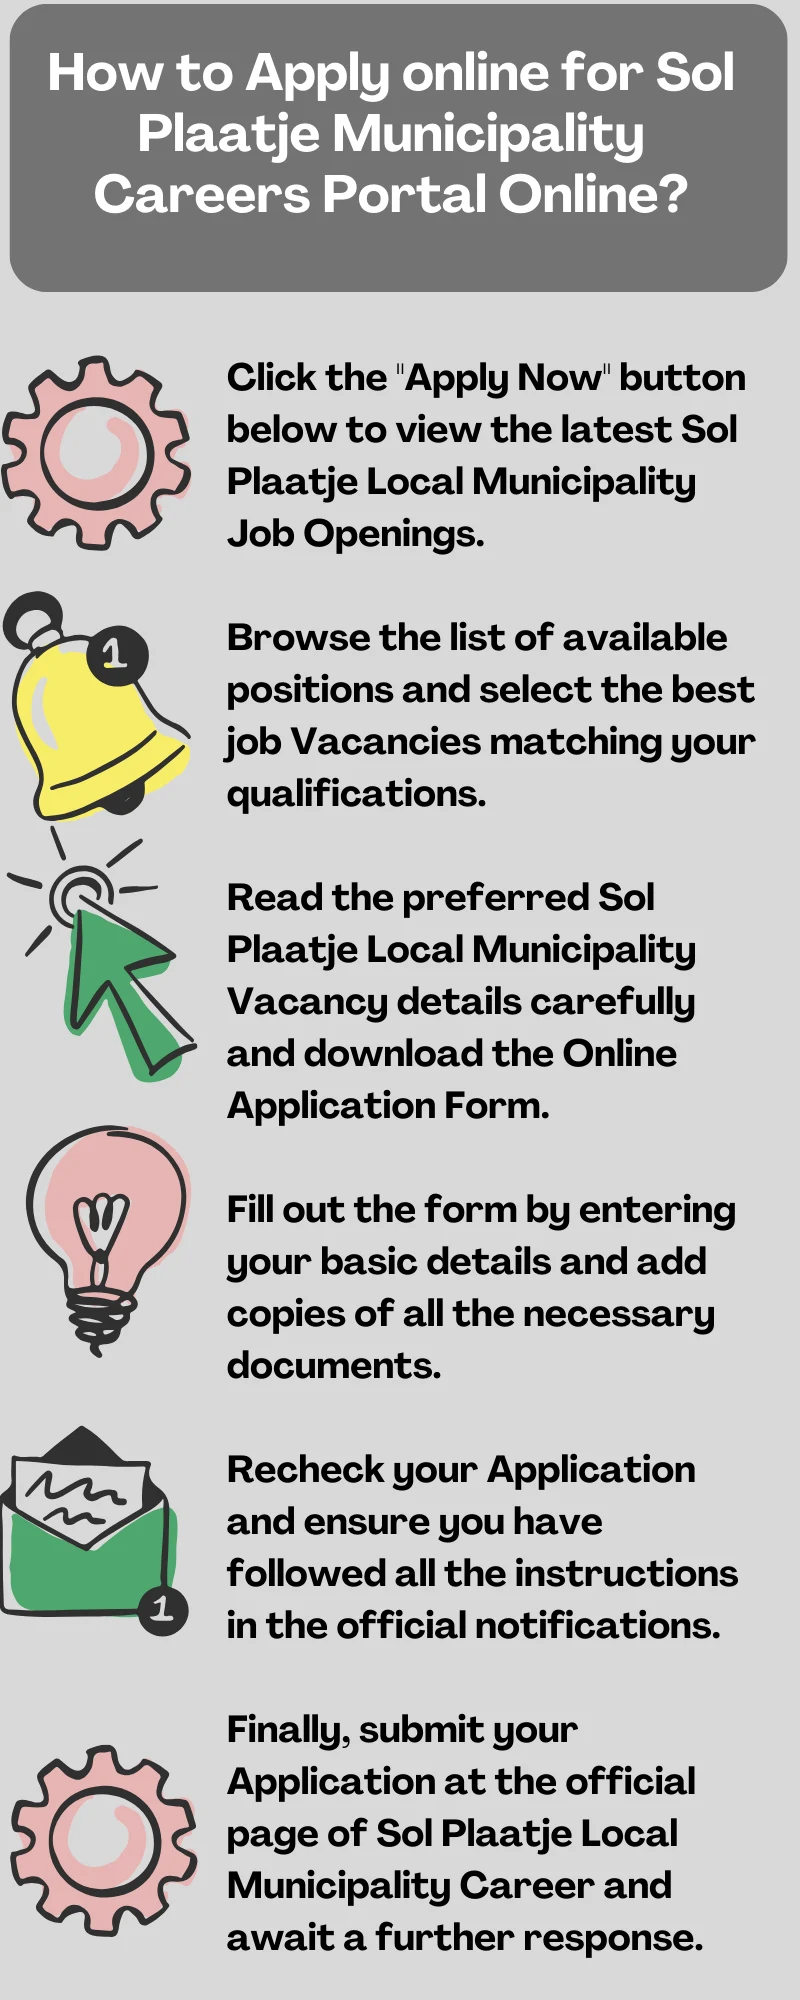 How to Apply online for Sol Plaatje Municipality Careers Portal Online?